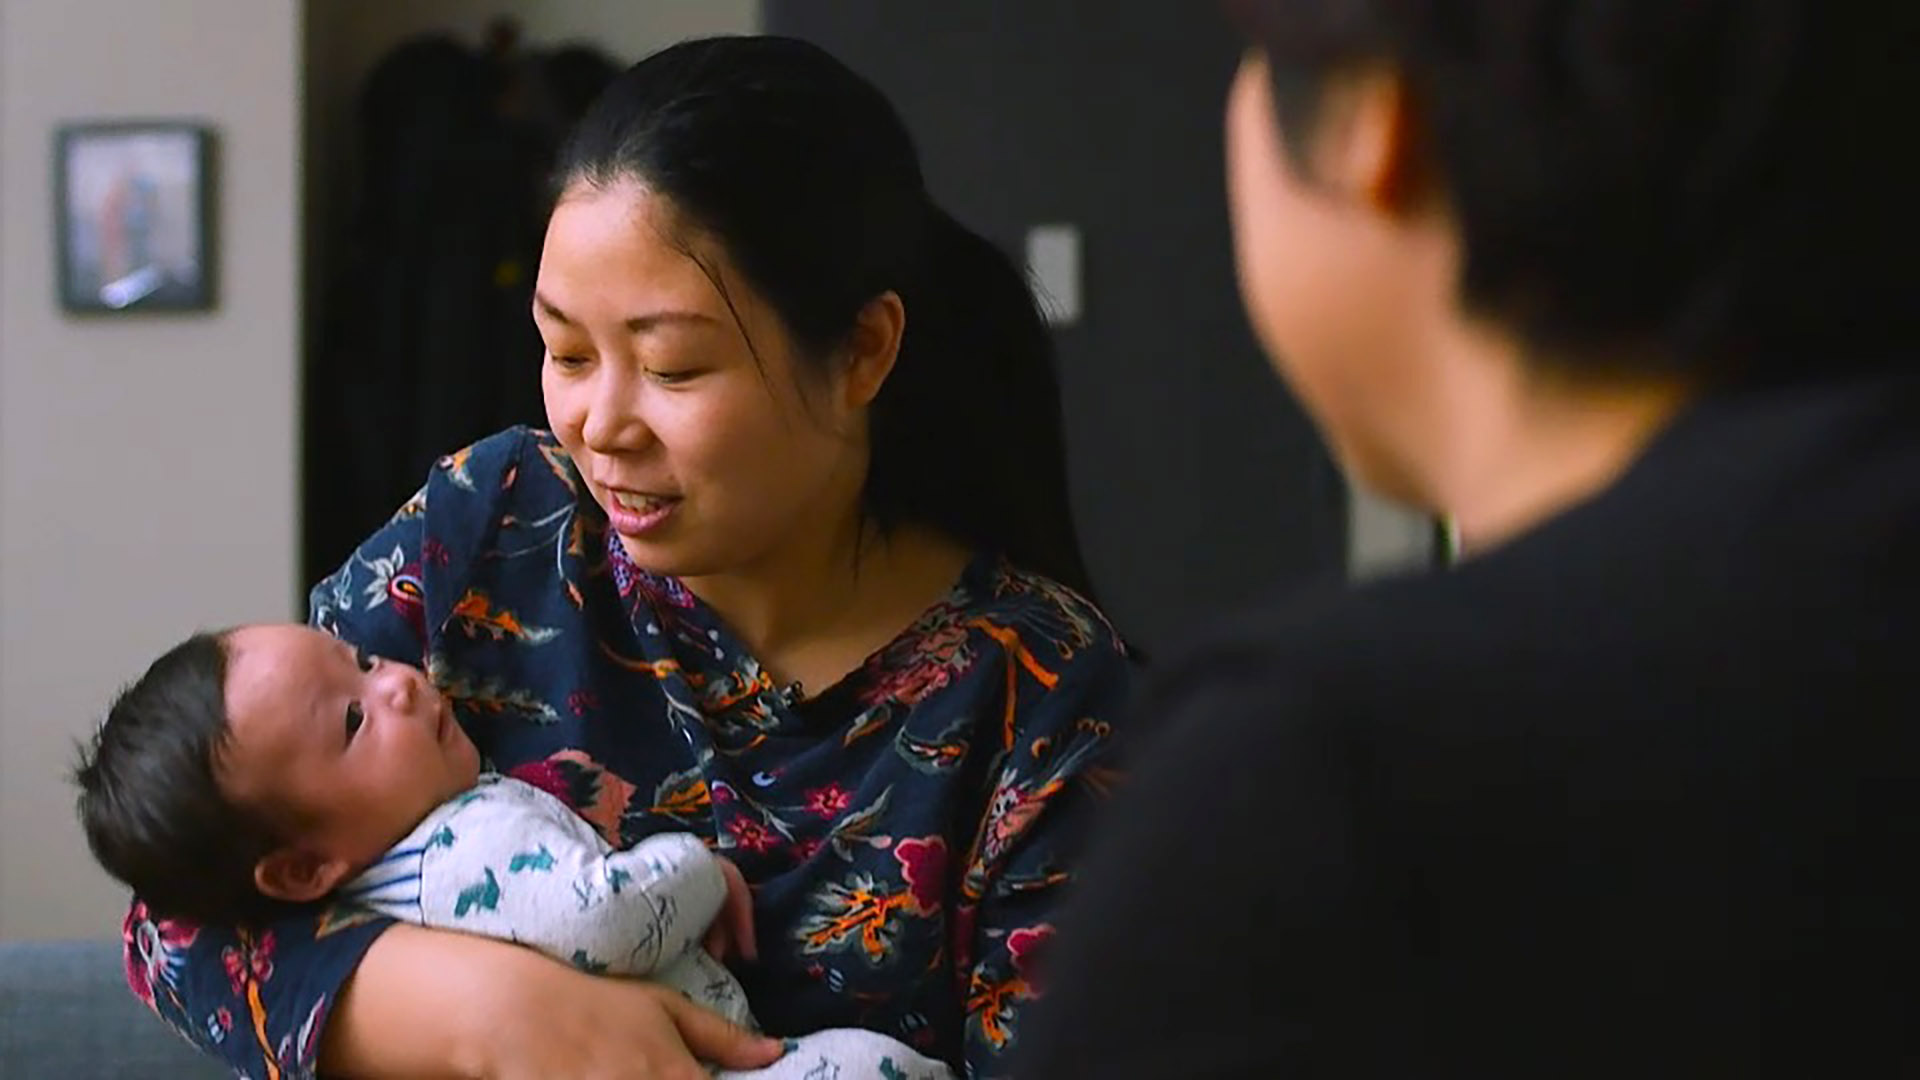 Nanfu wang holds her baby while interviewing her mother